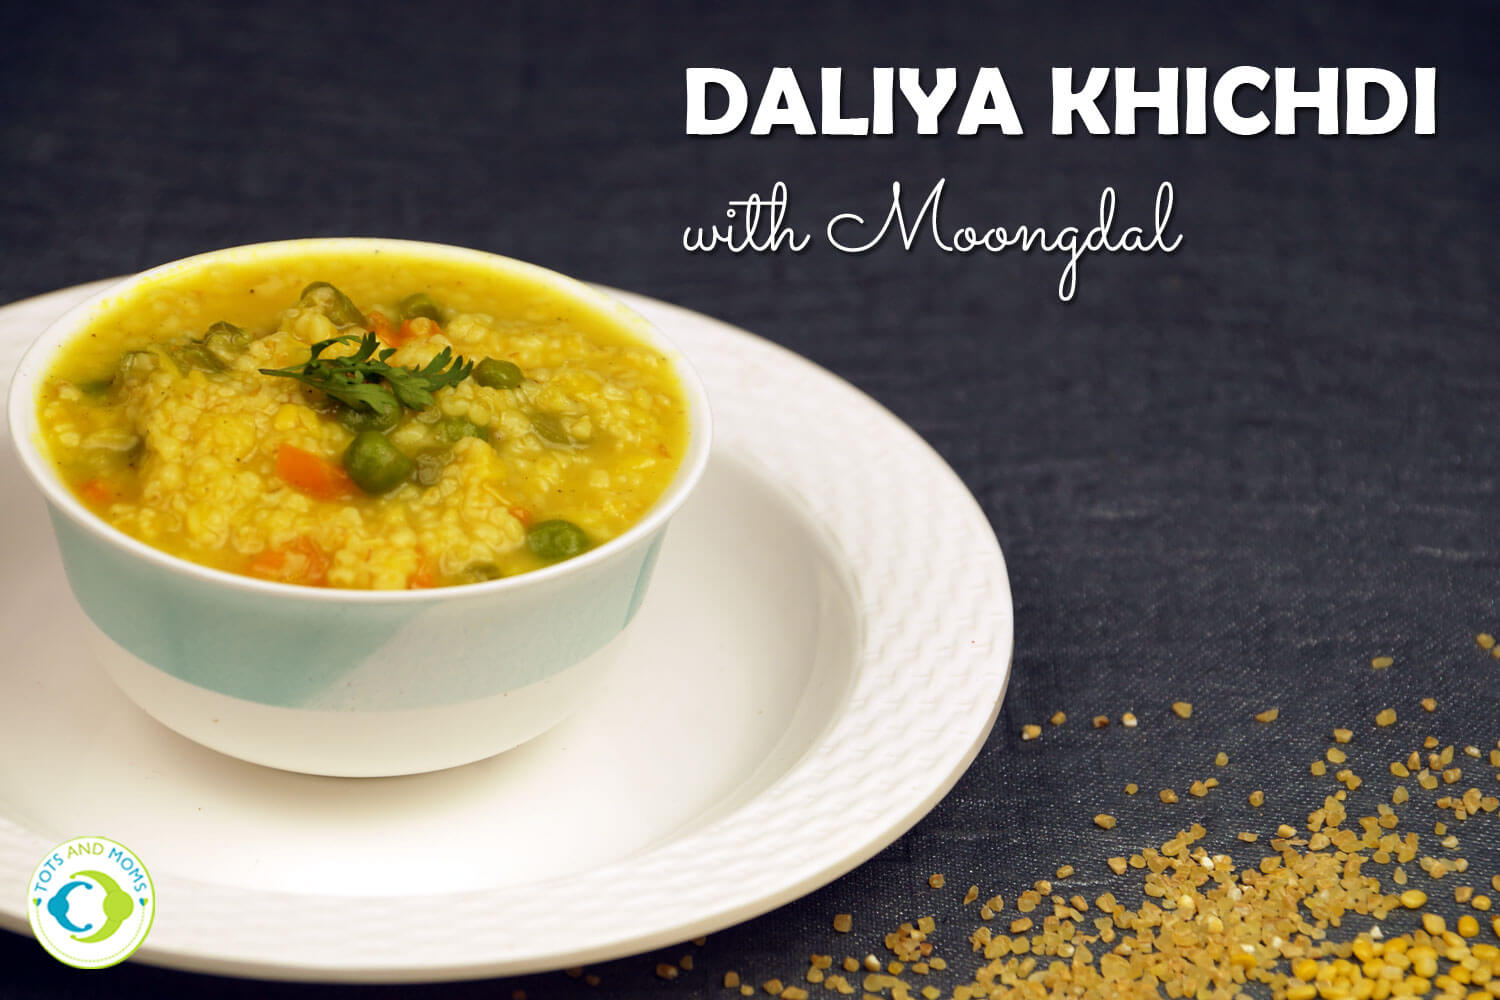 DALIYA KHICHDI WITH MOONG DAL for Babies, Toddlers, Kids & Family Homemade baby food for breakfast with Daliya